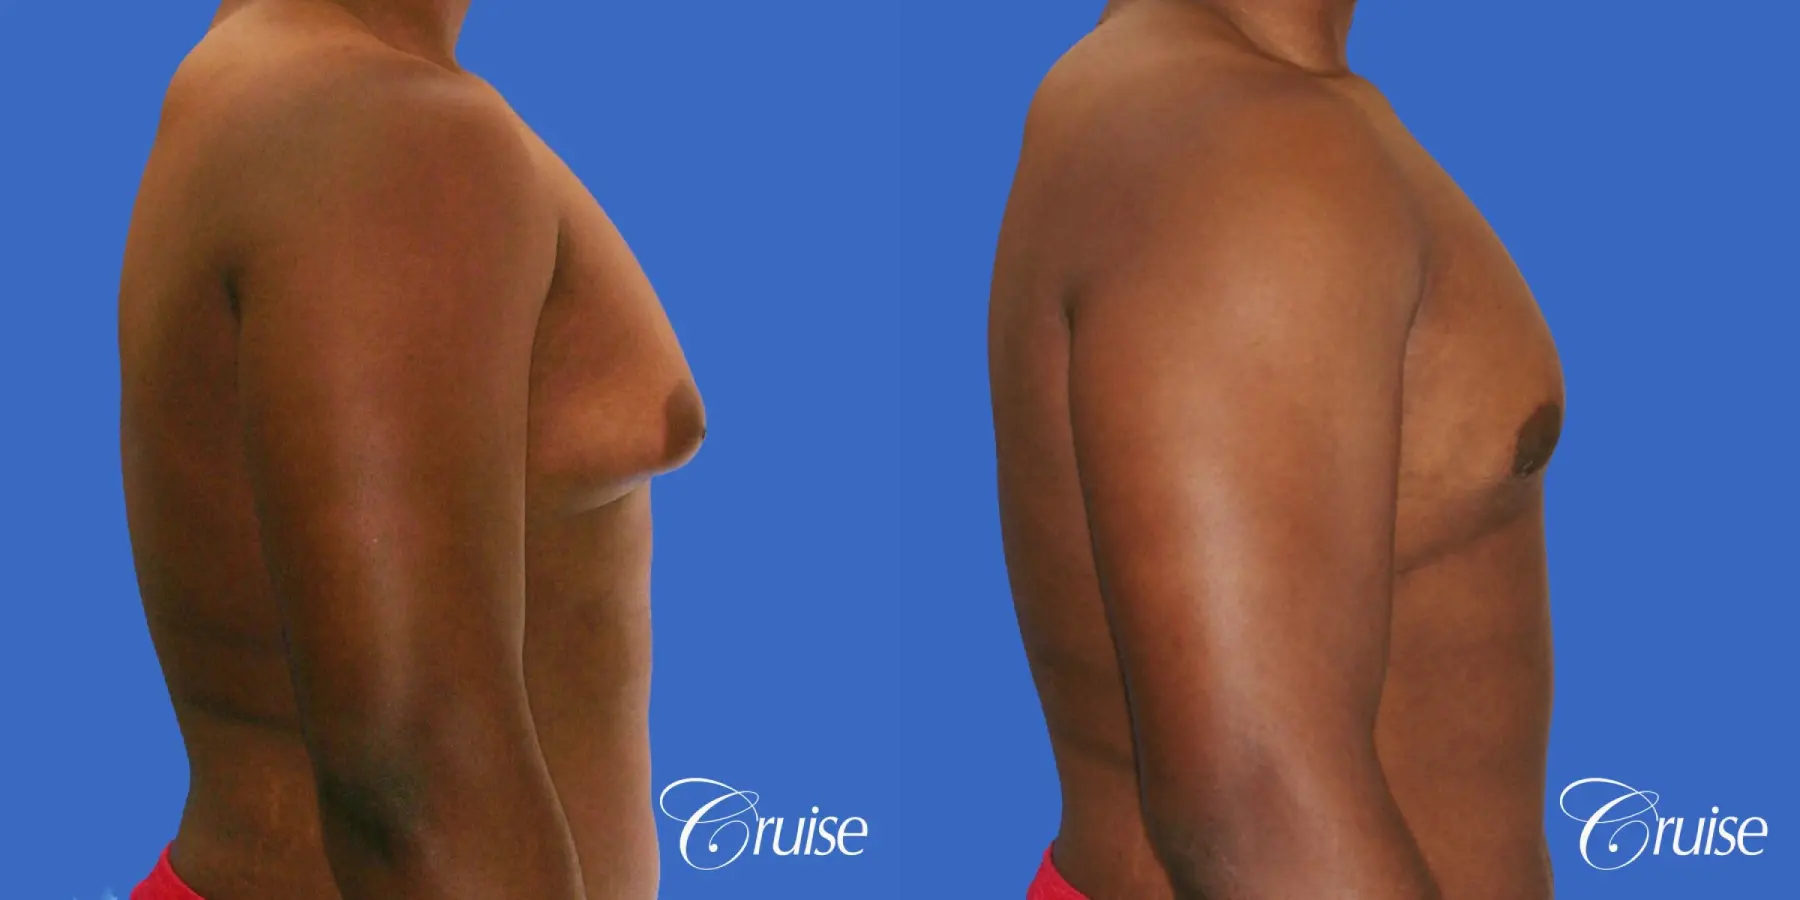 male breast moderate gynecomastia on young teen - Before and After 3